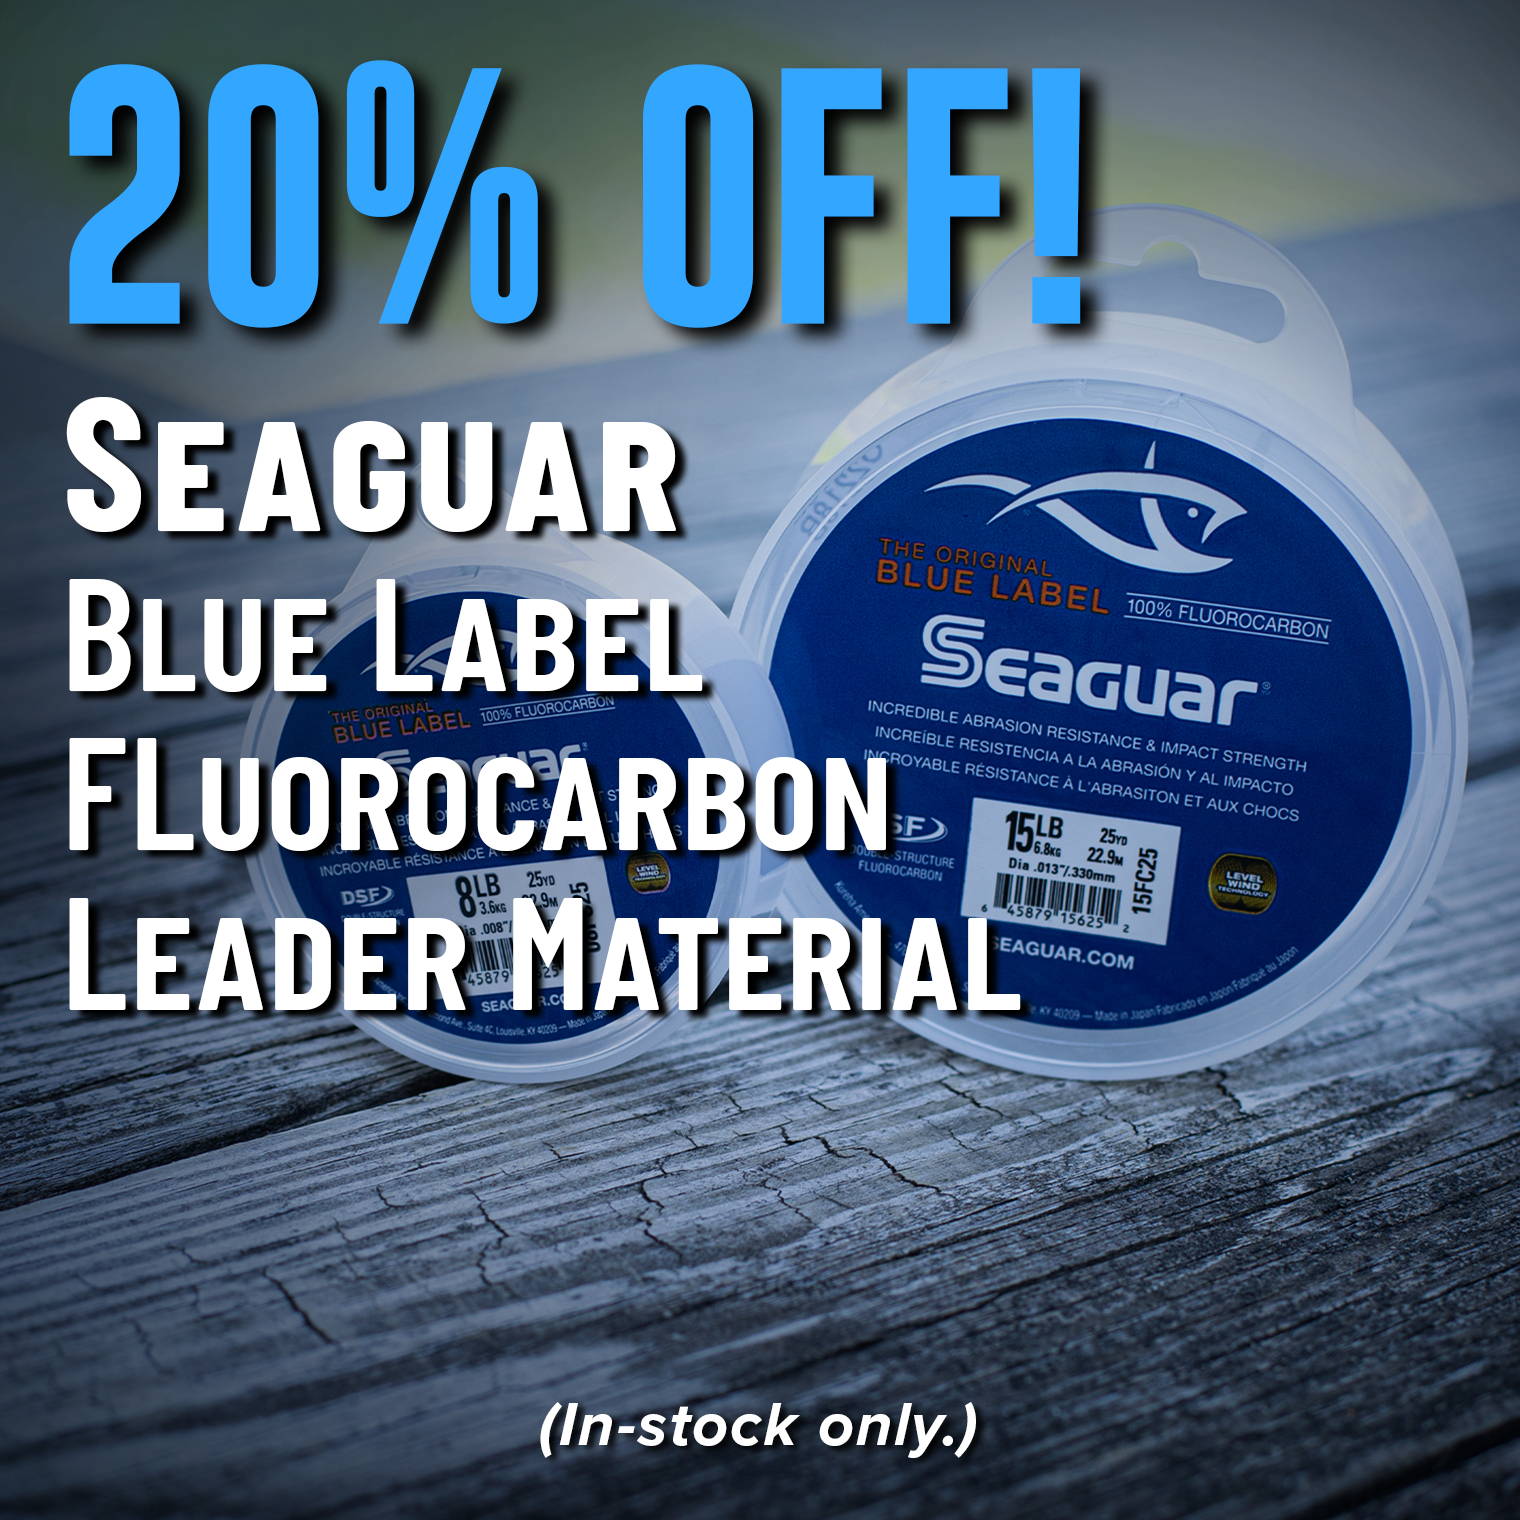 20% Off! Seaguar Blue Label FLuorocarbon Leader Material (In-stock only.)